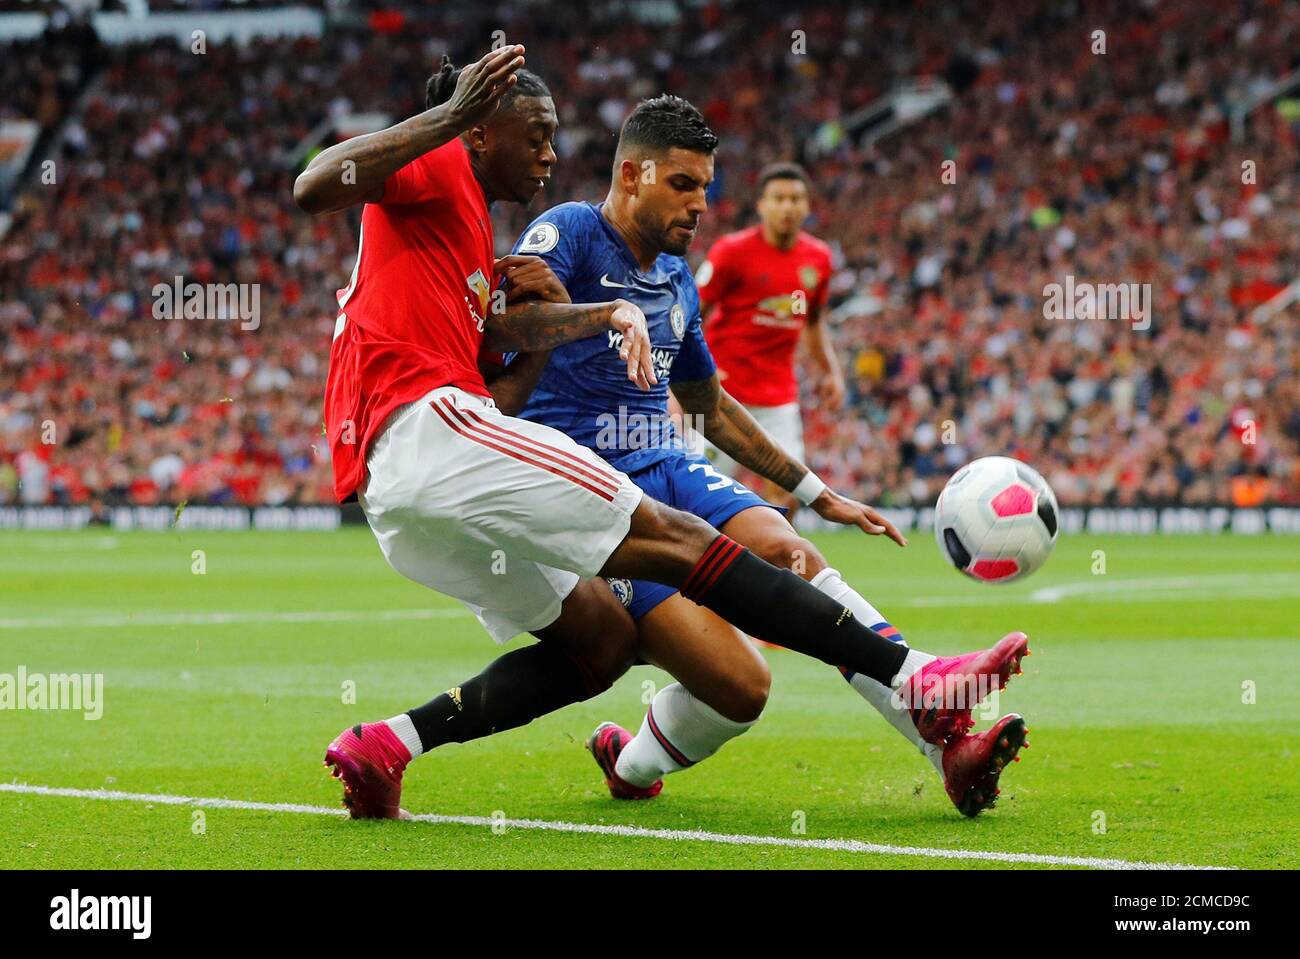 Soccer Football - Premier League - Manchester United v Chelsea - Old Trafford, Manchester, Britain - August 11, 2019  Manchester United's Aaron Wan-Bissaka in action with Chelsea's Emerson Palmieri   REUTERS/Phil Noble  EDITORIAL USE ONLY. No use with unauthorized audio, video, data, fixture lists, club/league logos or 'live' services. Online in-match use limited to 75 images, no video emulation. No use in betting, games or single club/league/player publications.  Please contact your account representative for further details. Stock Photo